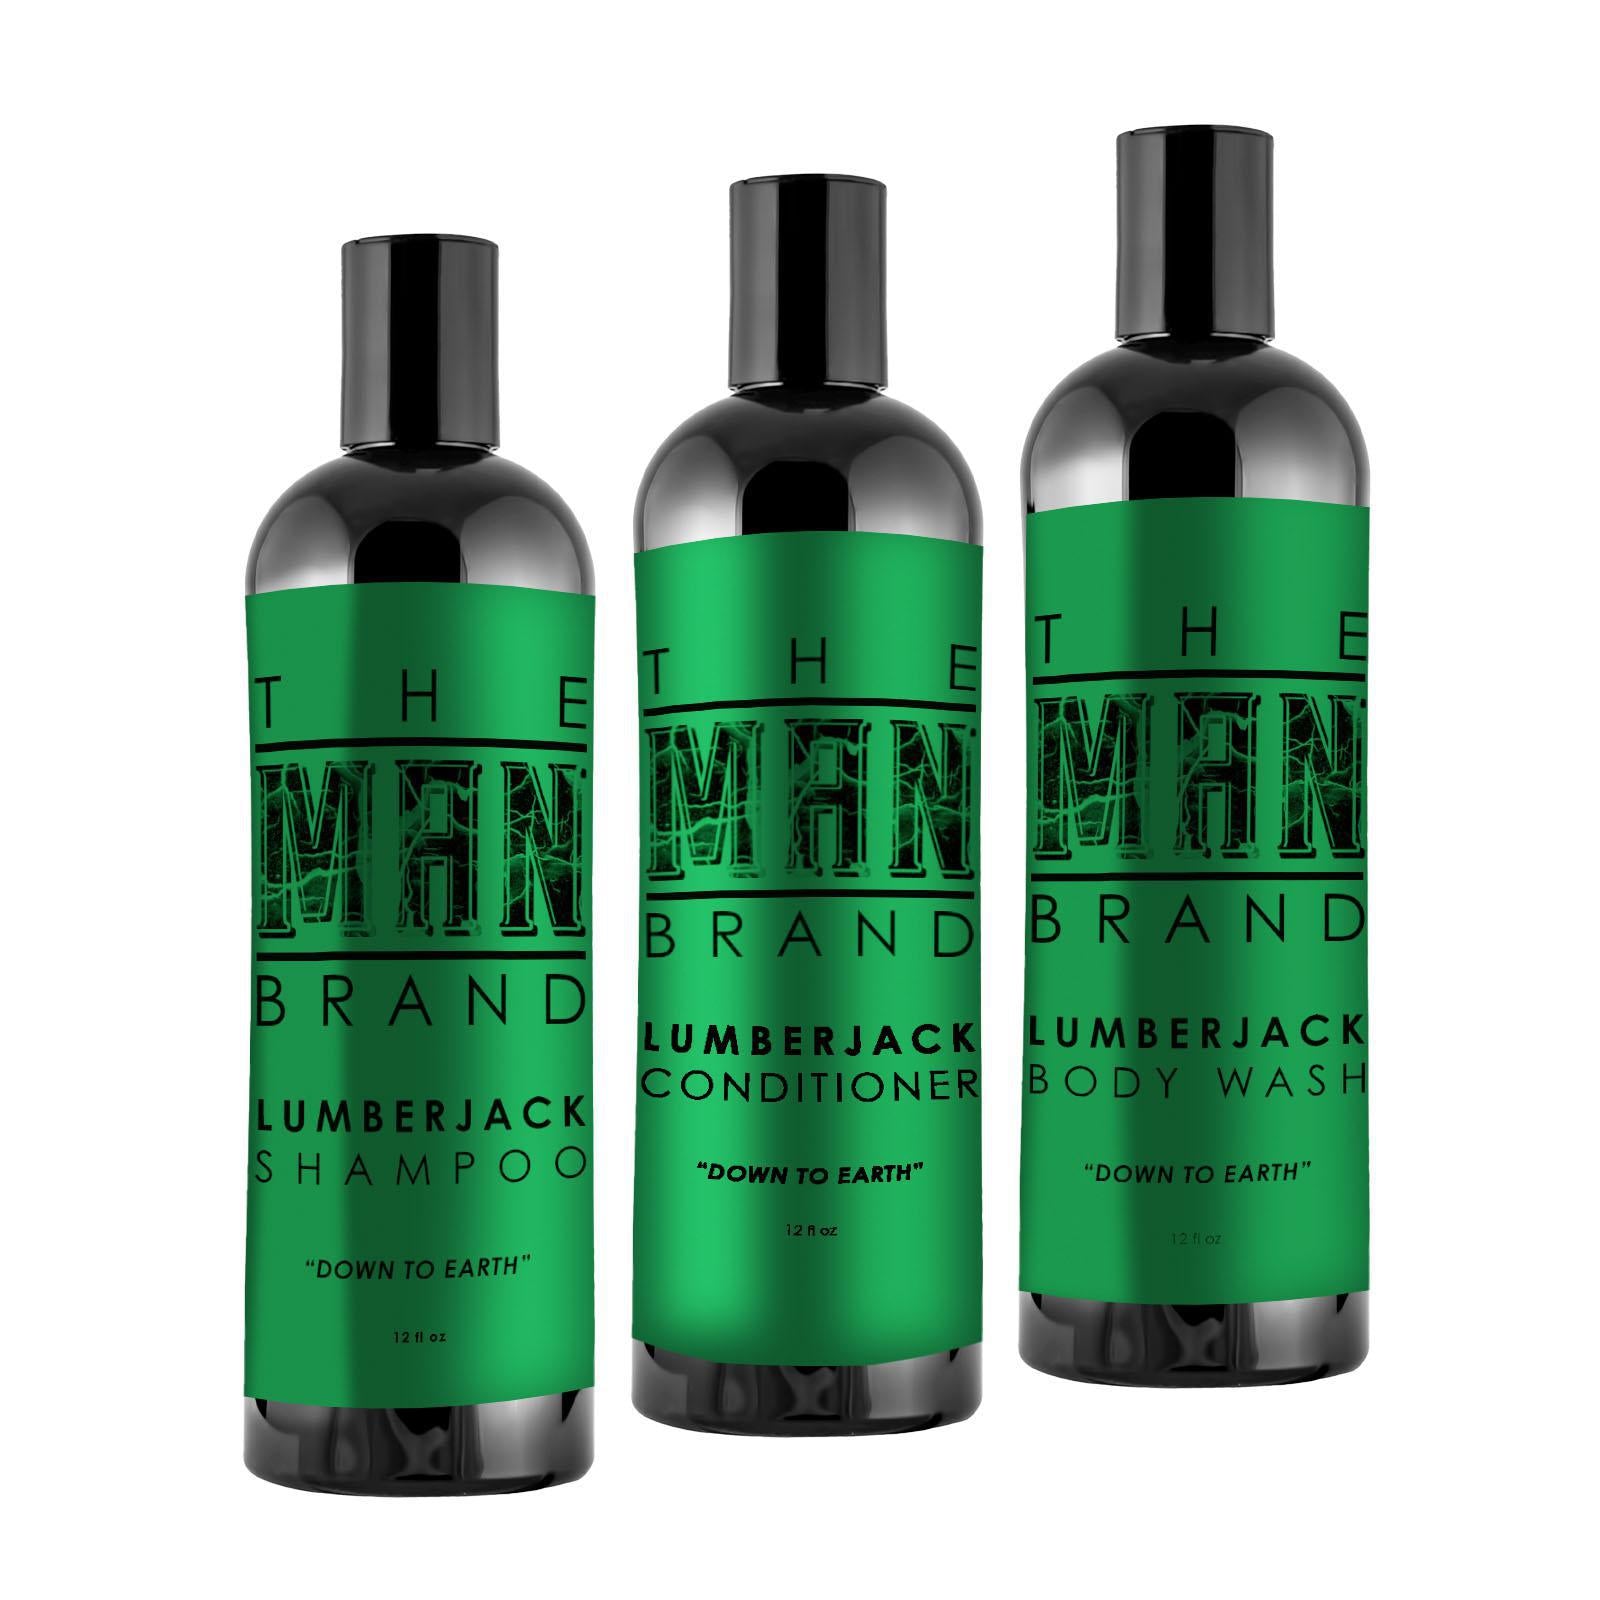 Shower Pack Men's Grooming Kit: Shampoo, Conditioner, and Body Wash